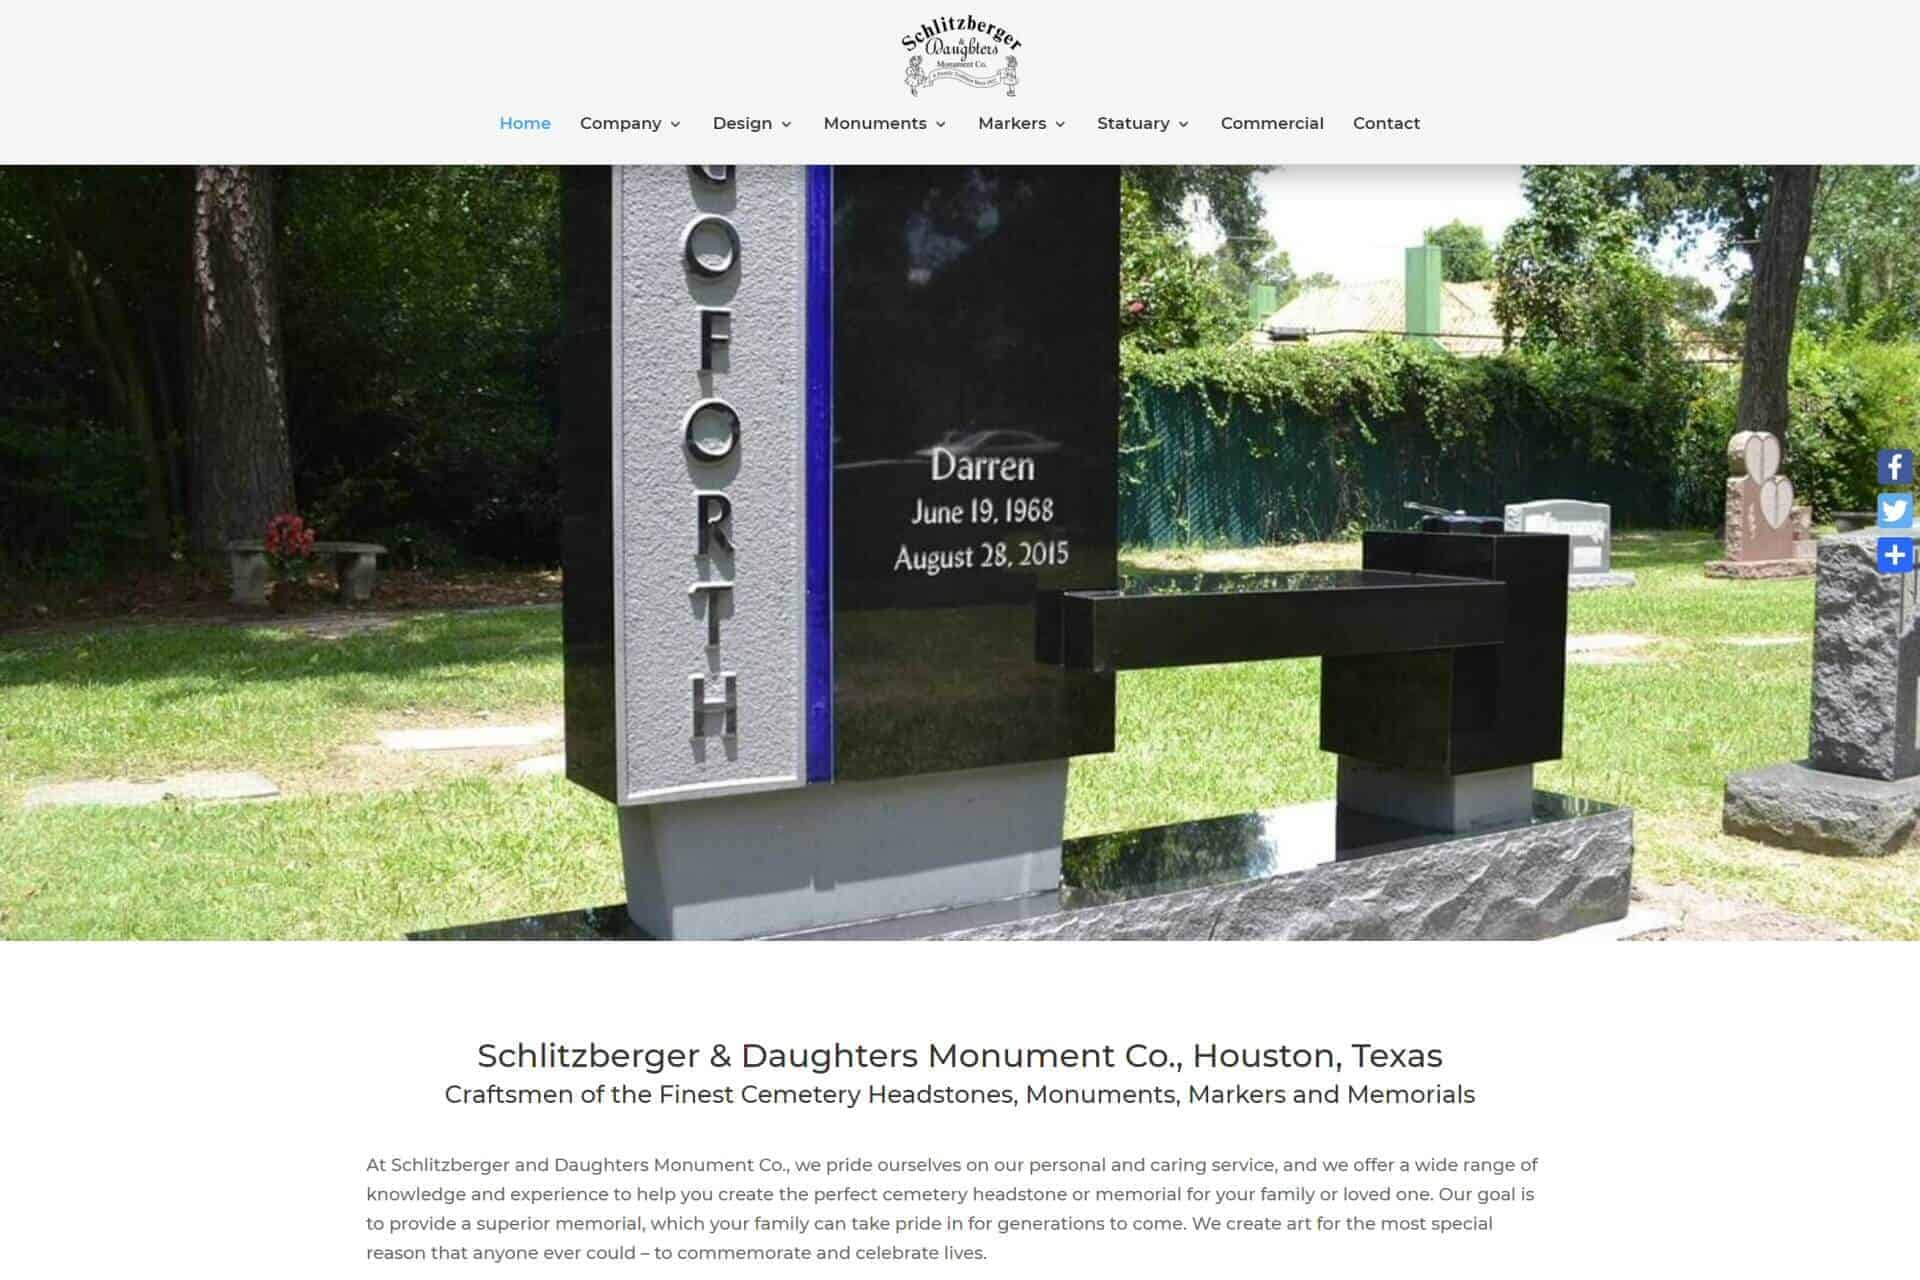 Schlitzberger & Daughters Cemetery Monuments, Markers & Memorials - Website Links for Marquise Pools #1 Best Pool Builder